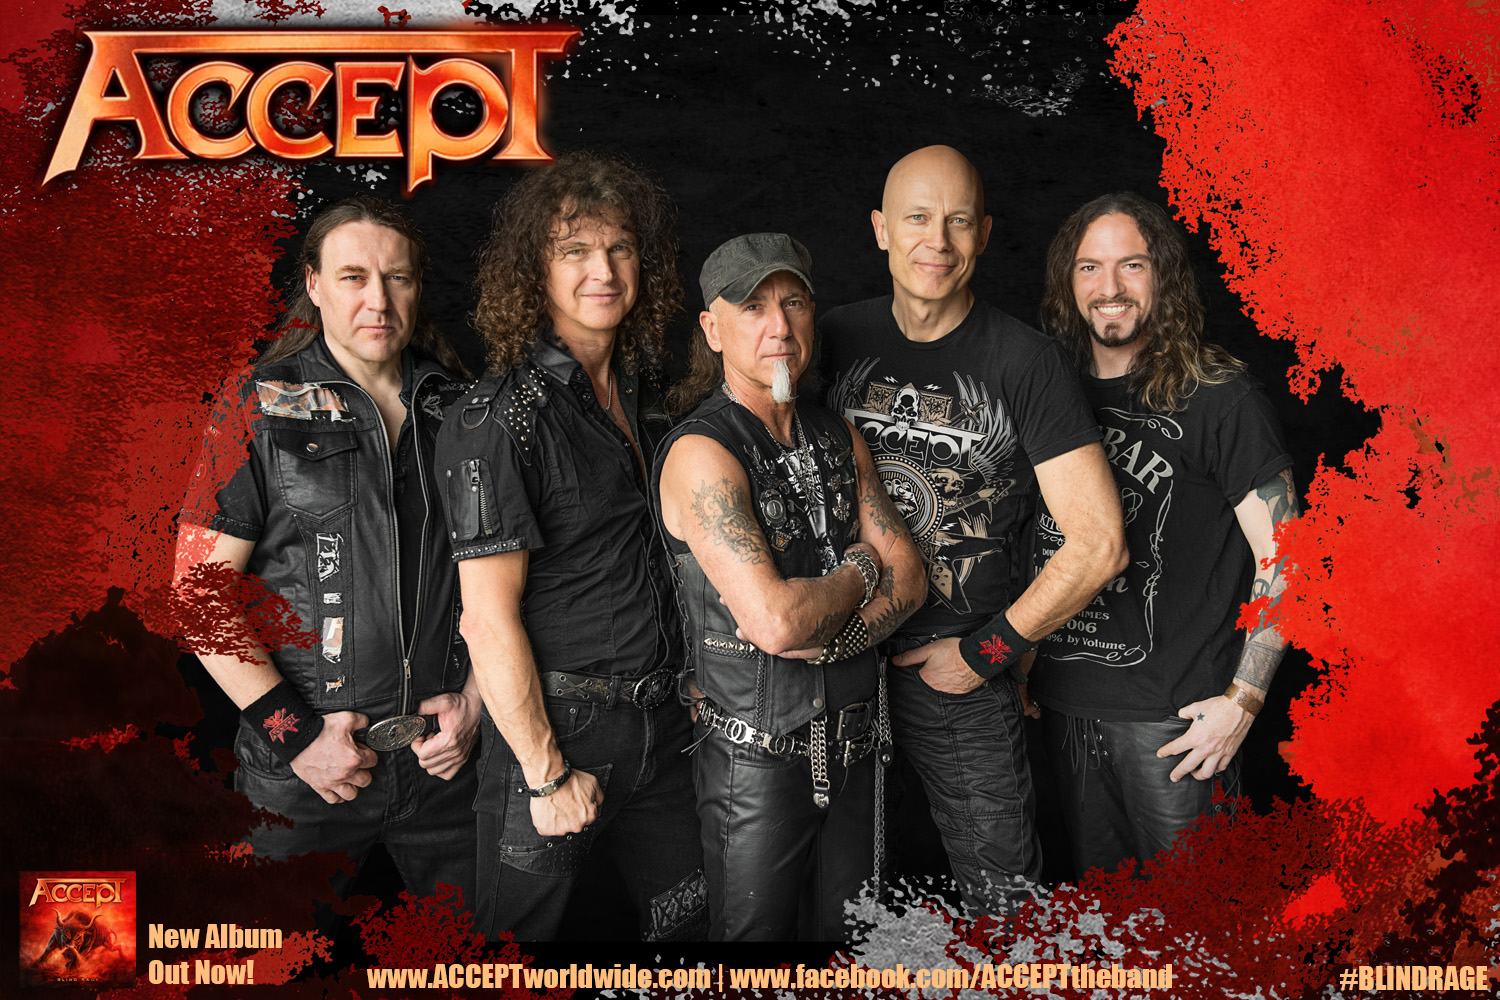 Accept Wallpapers